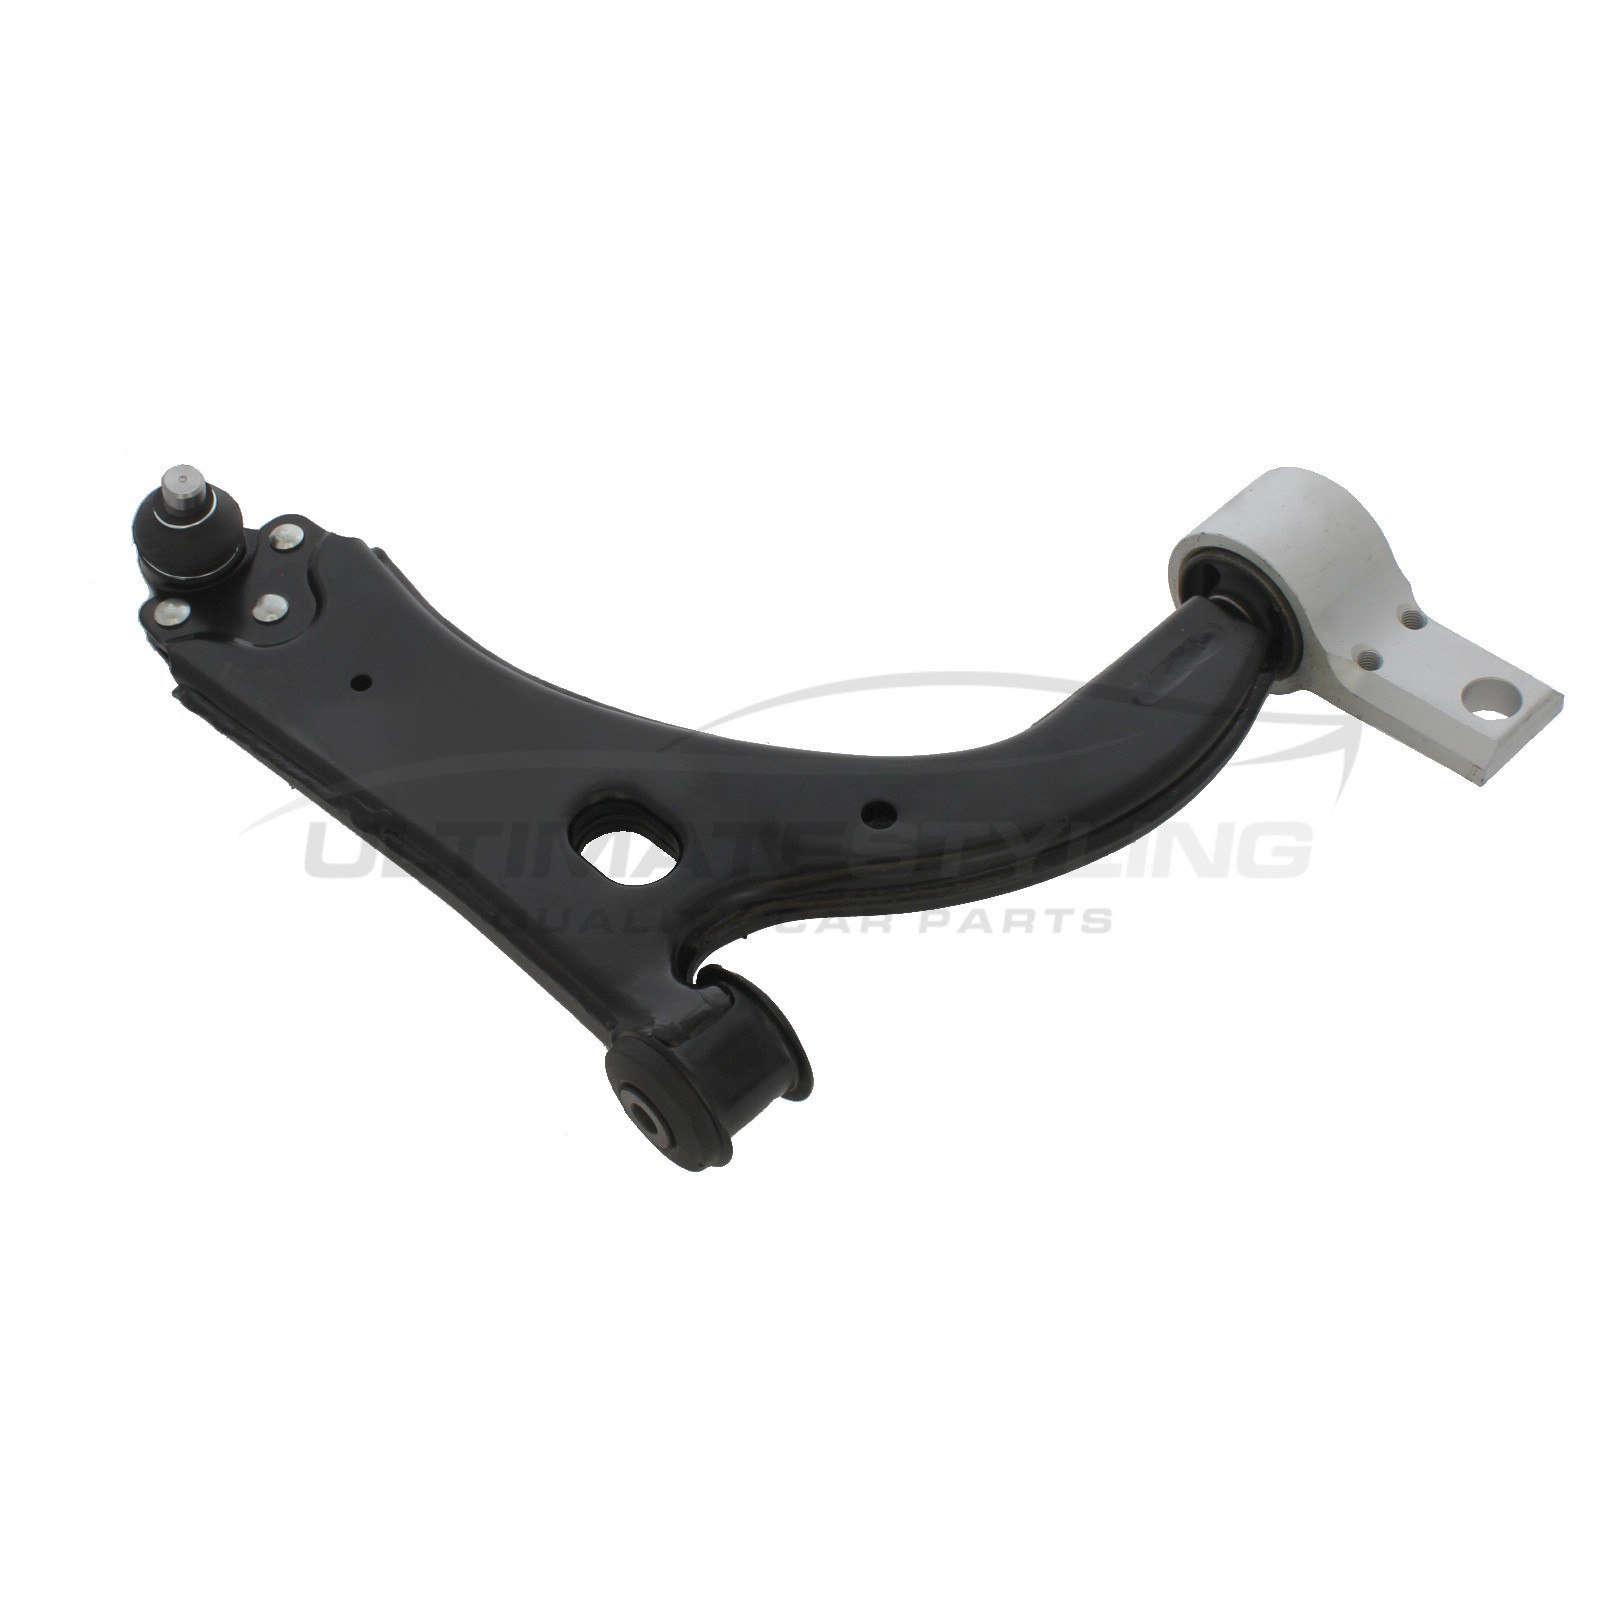 Ford Fiesta 2002-2009, Ford Fusion 2002-2011, Mazda 2 2003-2007 Front Lower Suspension Arm (Steel) Including Ball Joint and Rear Bush Driver Side (RH)